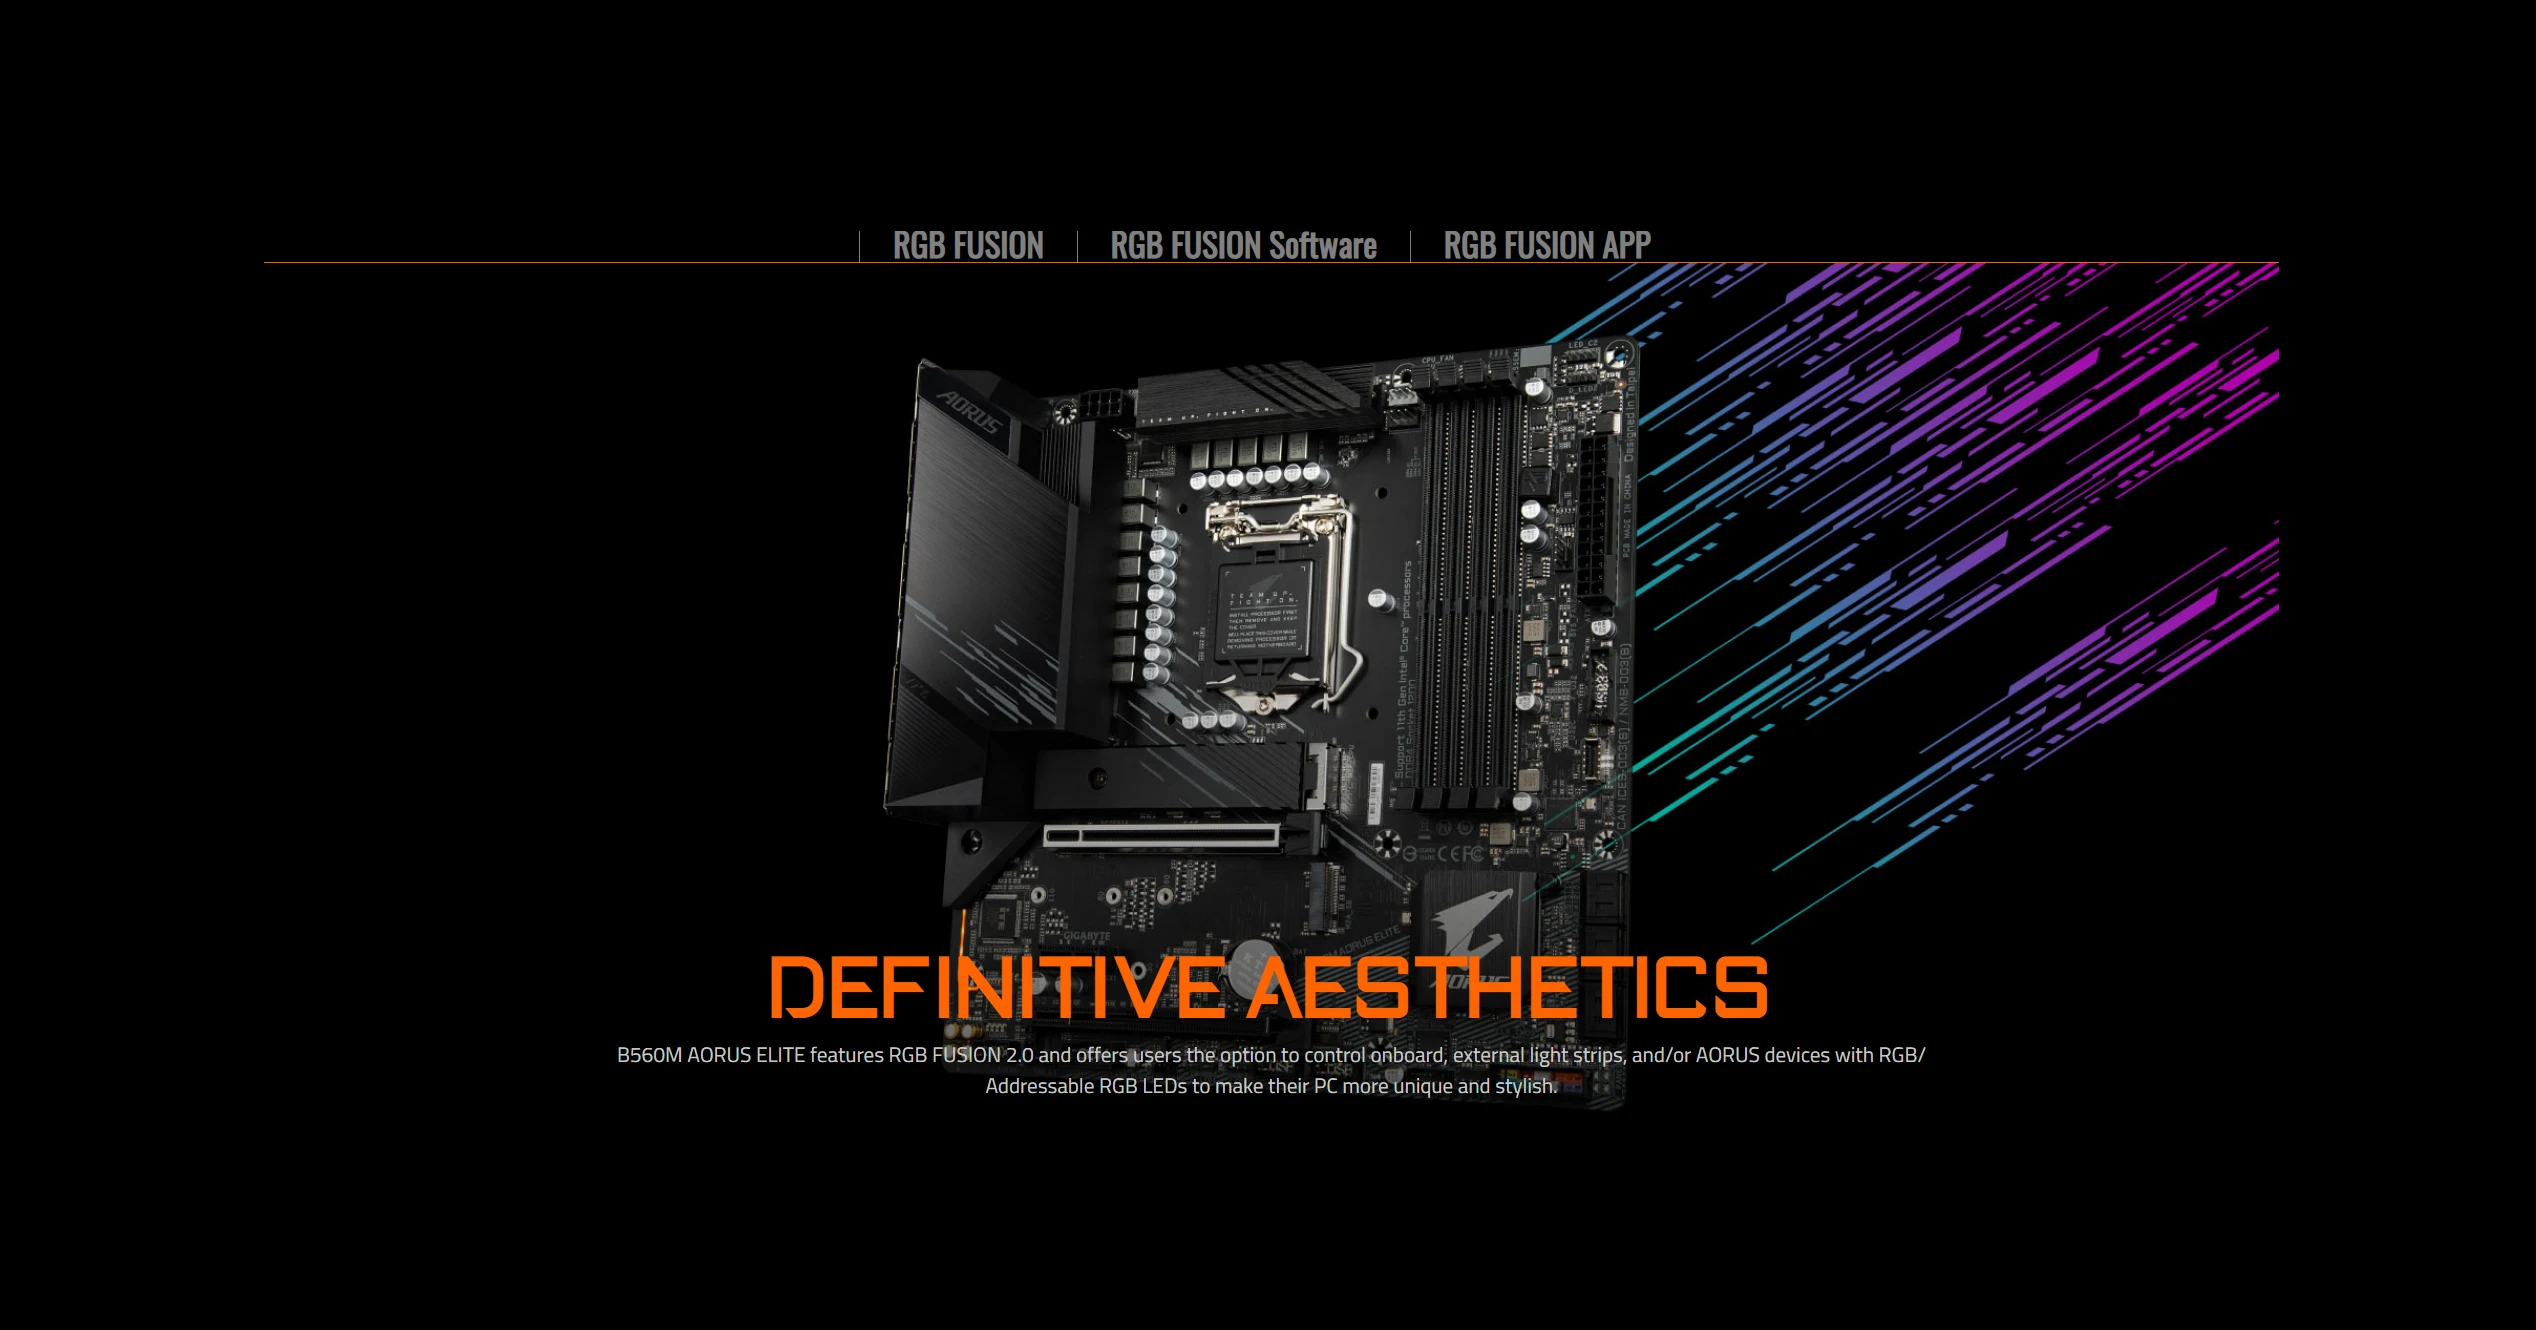 Intel Core i5 11400F CPU +GA B560M AORUS ELITE Motherboard Suit No integrated graphics card LGA 1200 New but without coole cheapest motherboard for pc